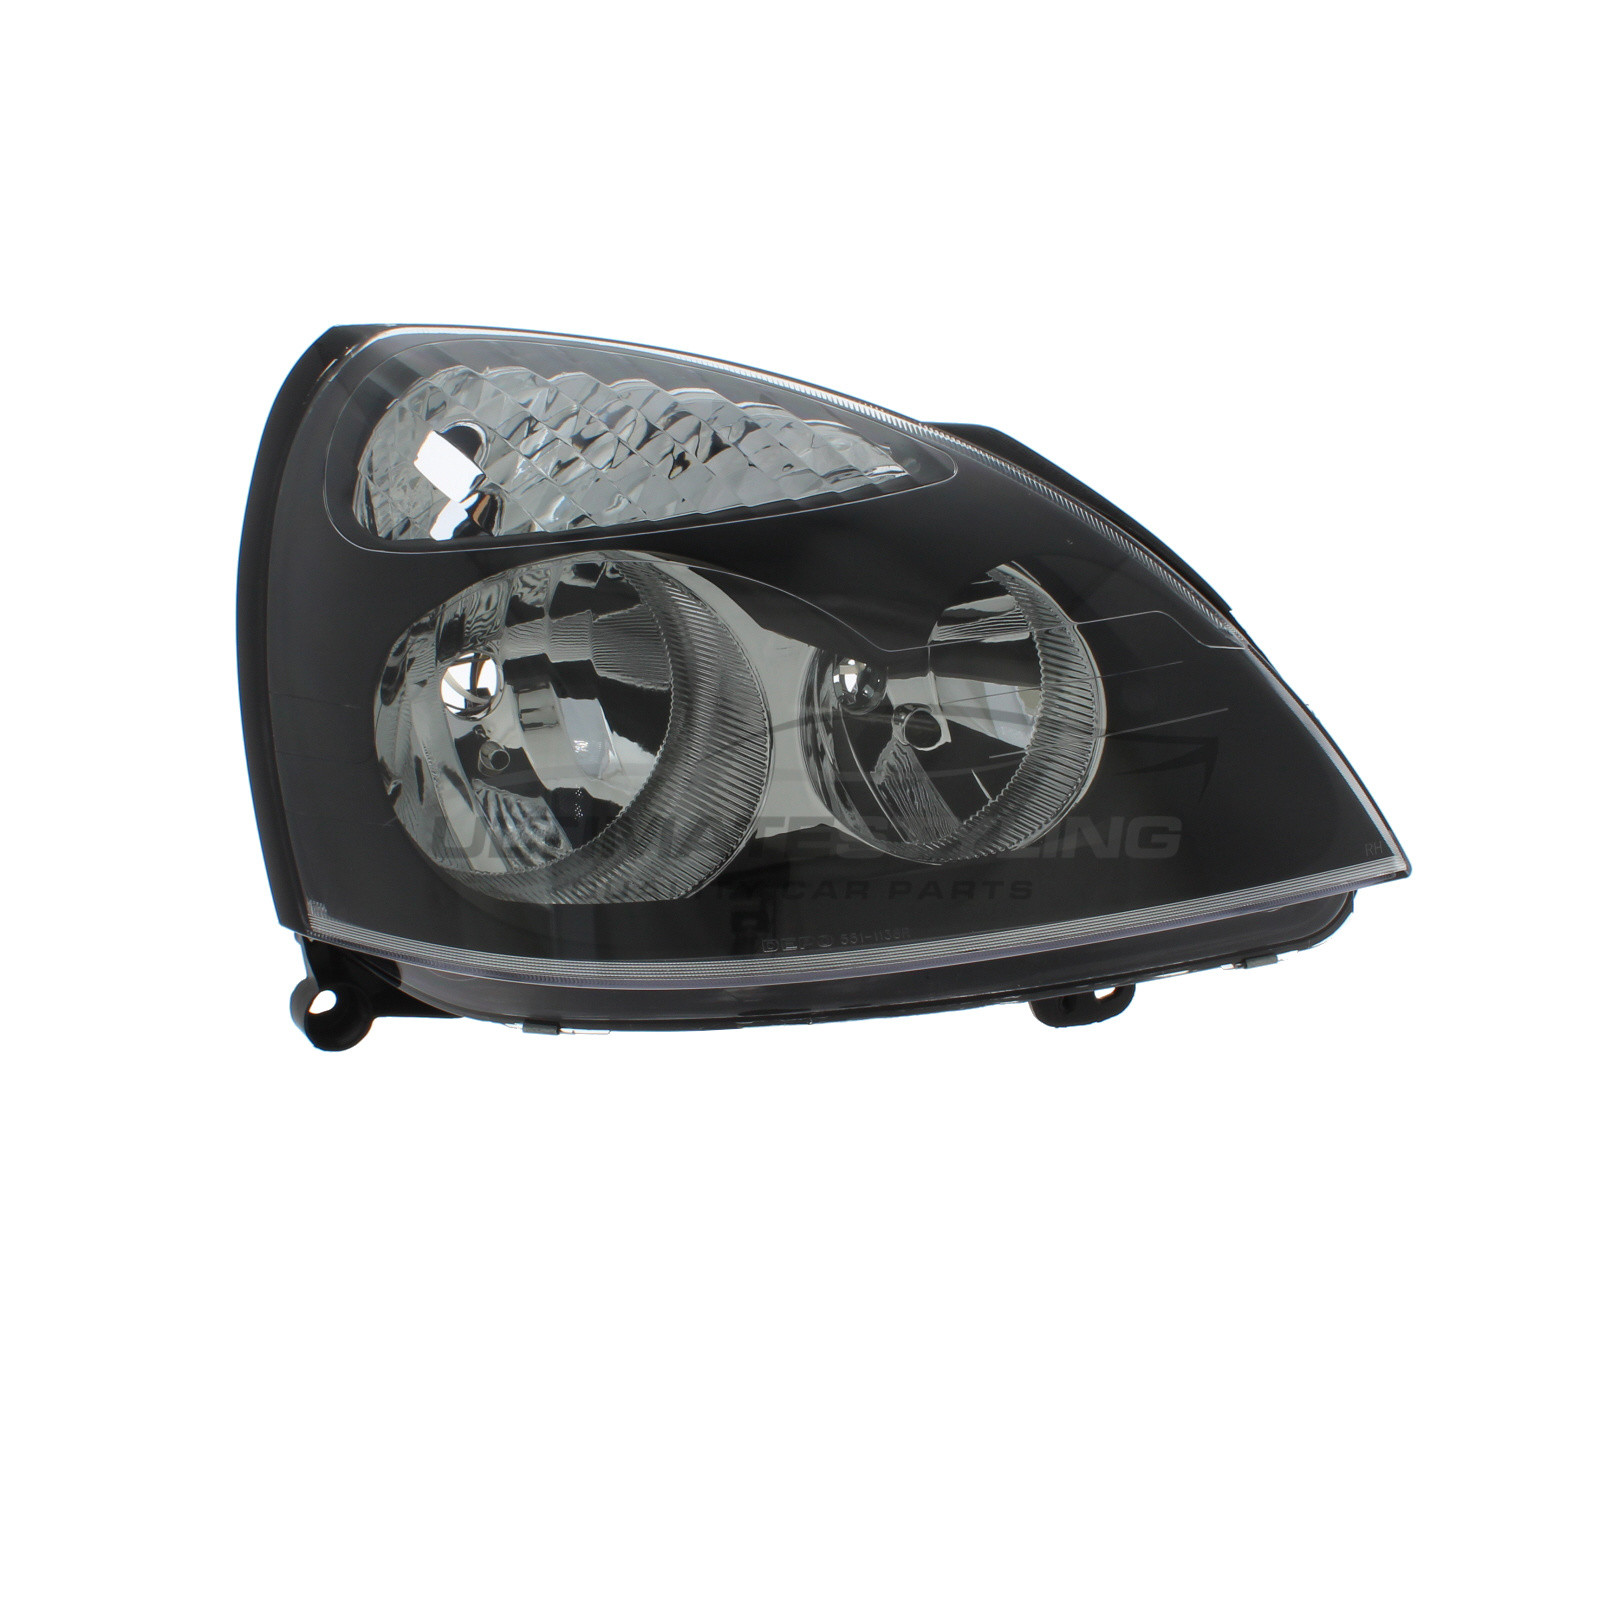 Renault Clio 2001-2005 Halogen, Electric Without Motor, Headlight / Headlamp Black Surround Drivers Side (RH)